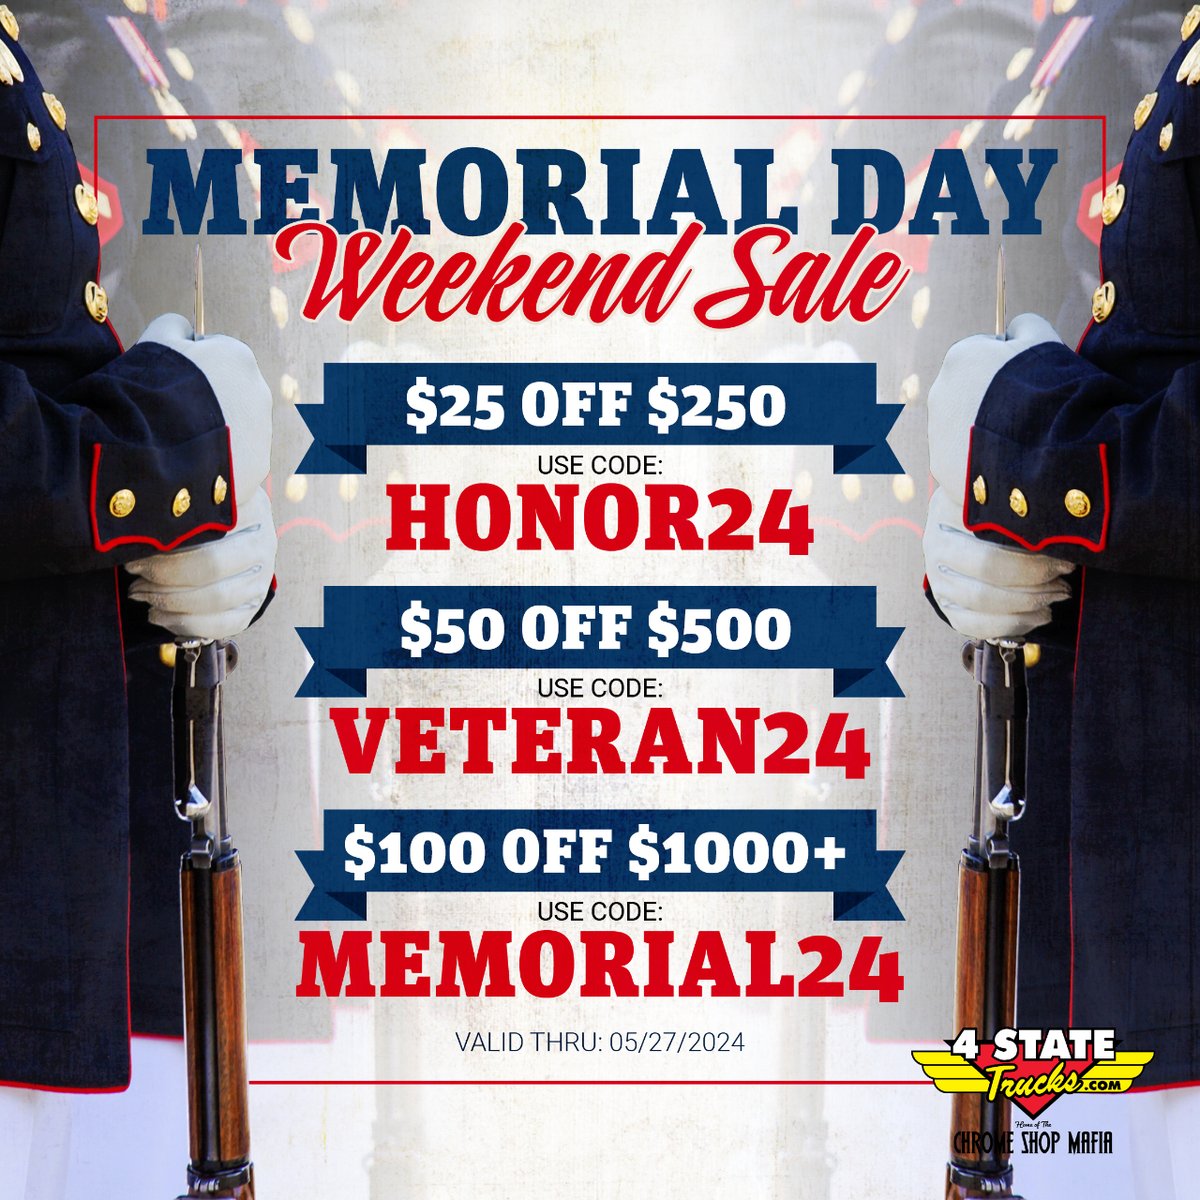 Let's get Memorial Day Weekend started right with deals! 
🔴 Code HONOR24 for $25 OFF $250
⚪ Code VETERAN24 for $50 OFF $500
🔵 Code MEMORIAL24 for $100 OFF $1000+
4statetrucks.com
Ends 5/27 11:59 p.m. cst 

#4StateTrucks #ChromeShopMafia #trucking #MemorialDayWeekendSale